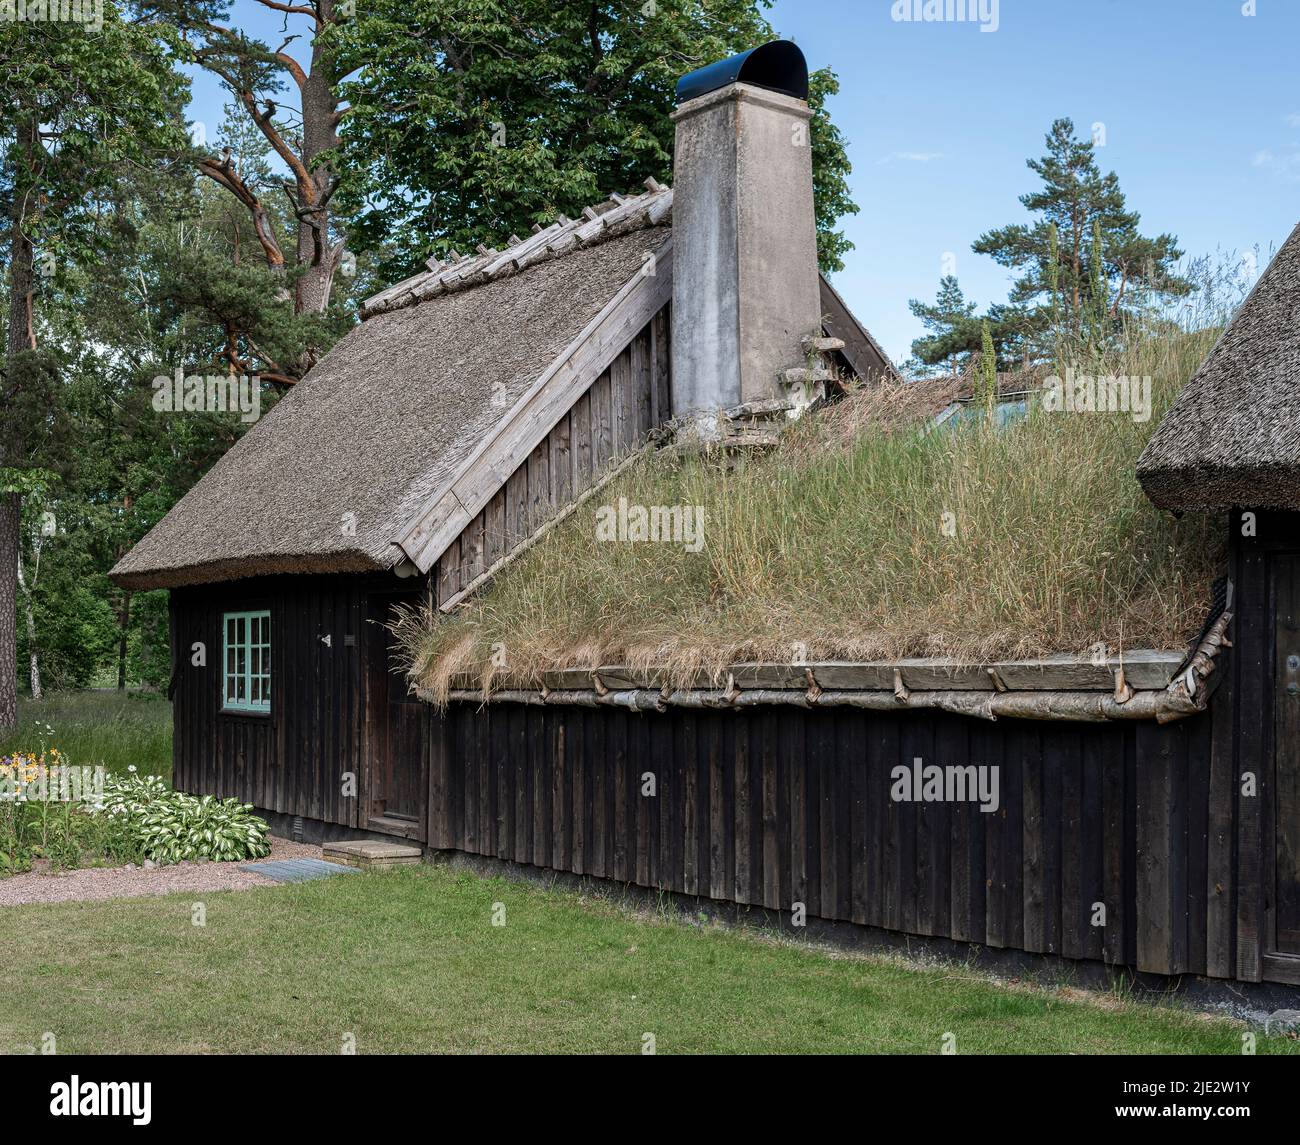 Karlstorpsstugan is an old thatched cottage where the swedish king Charles XII spent one night, Halmstad, Sweden, June 20, 2022 Stock Photo